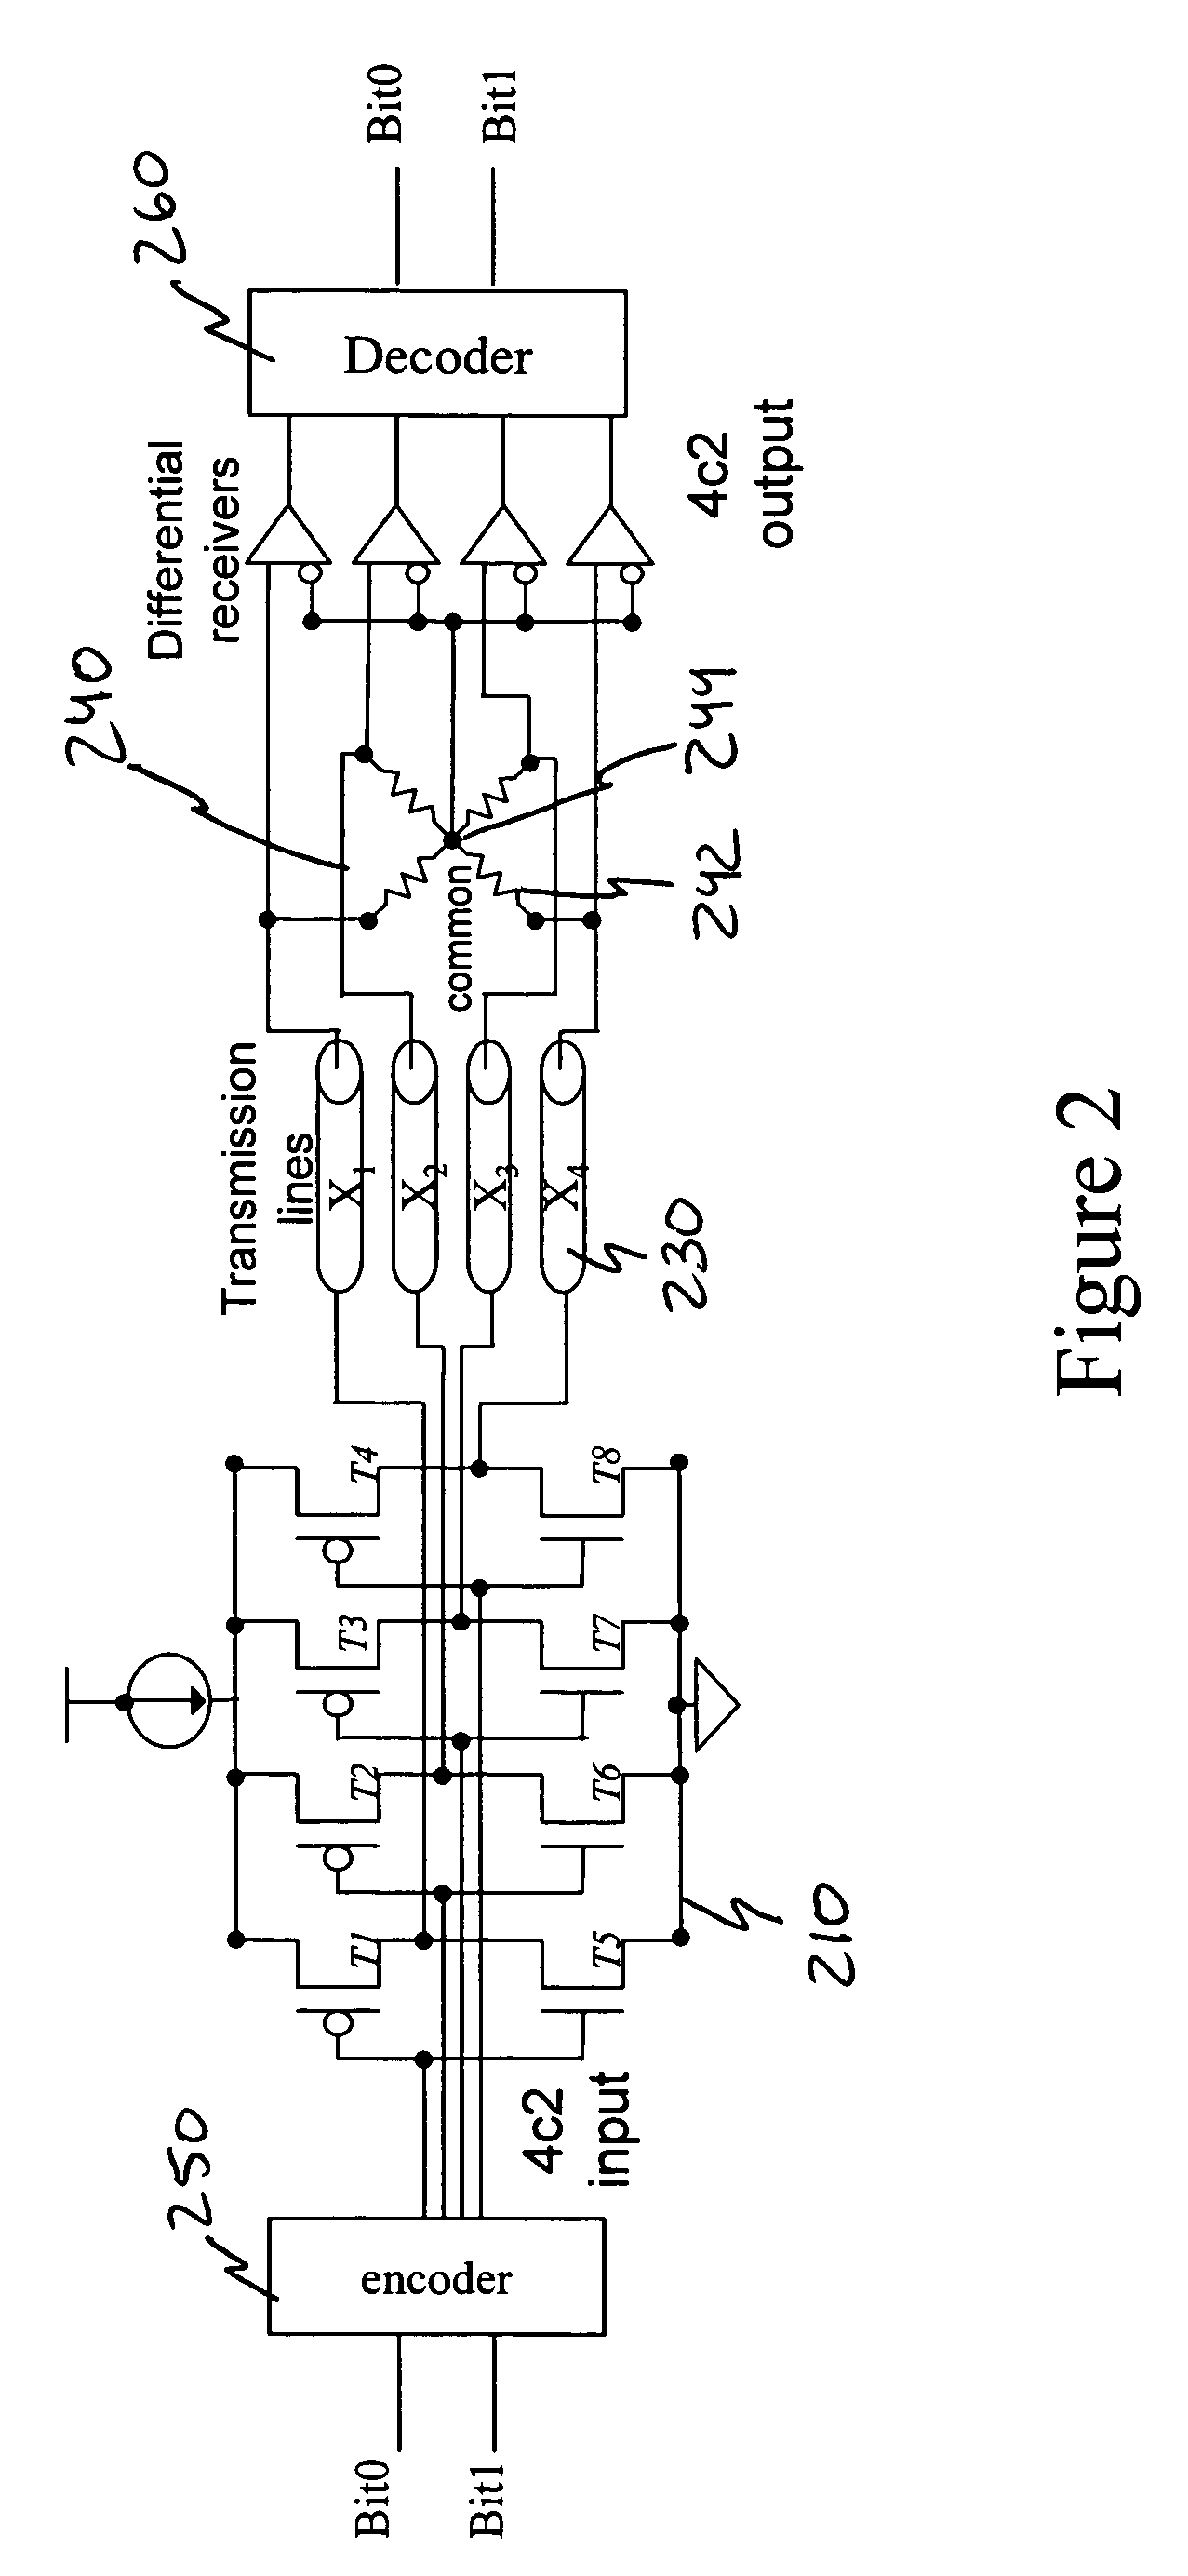 Power efficient, high bandwidth communication using multi-signal-differential channels